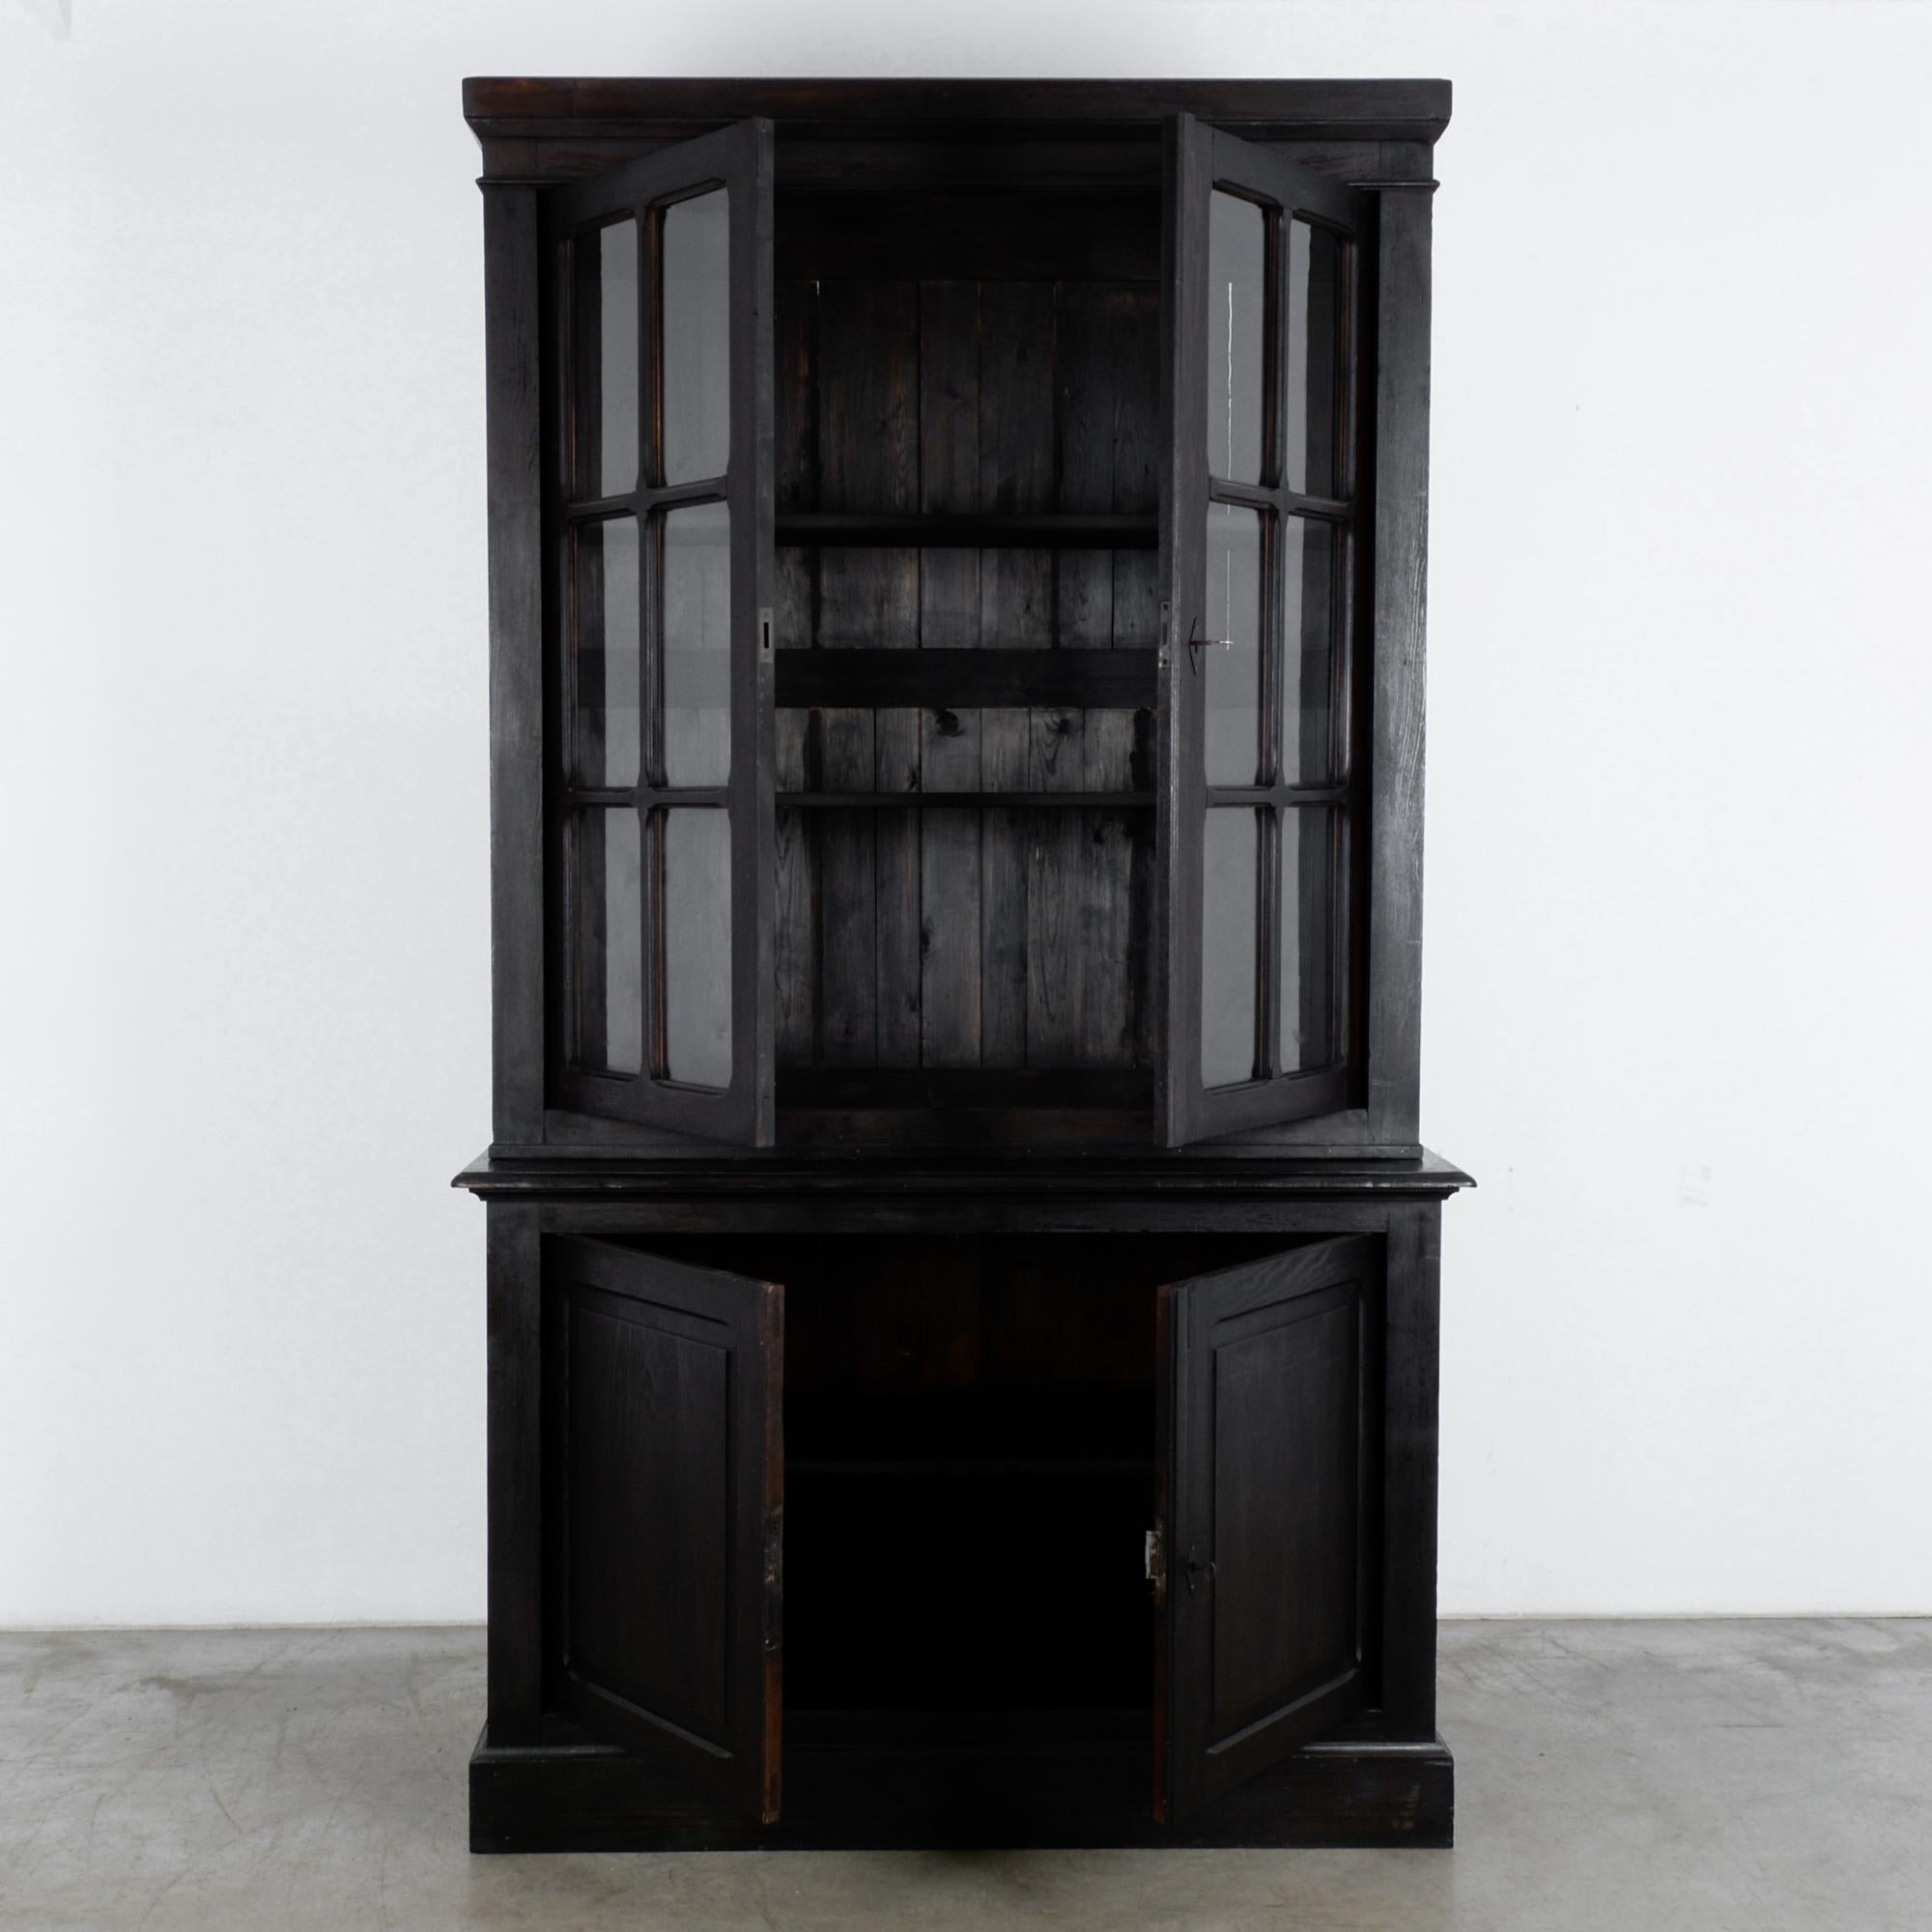 French Provincial Turn of the Century Belgian Black Wooden Vitrine